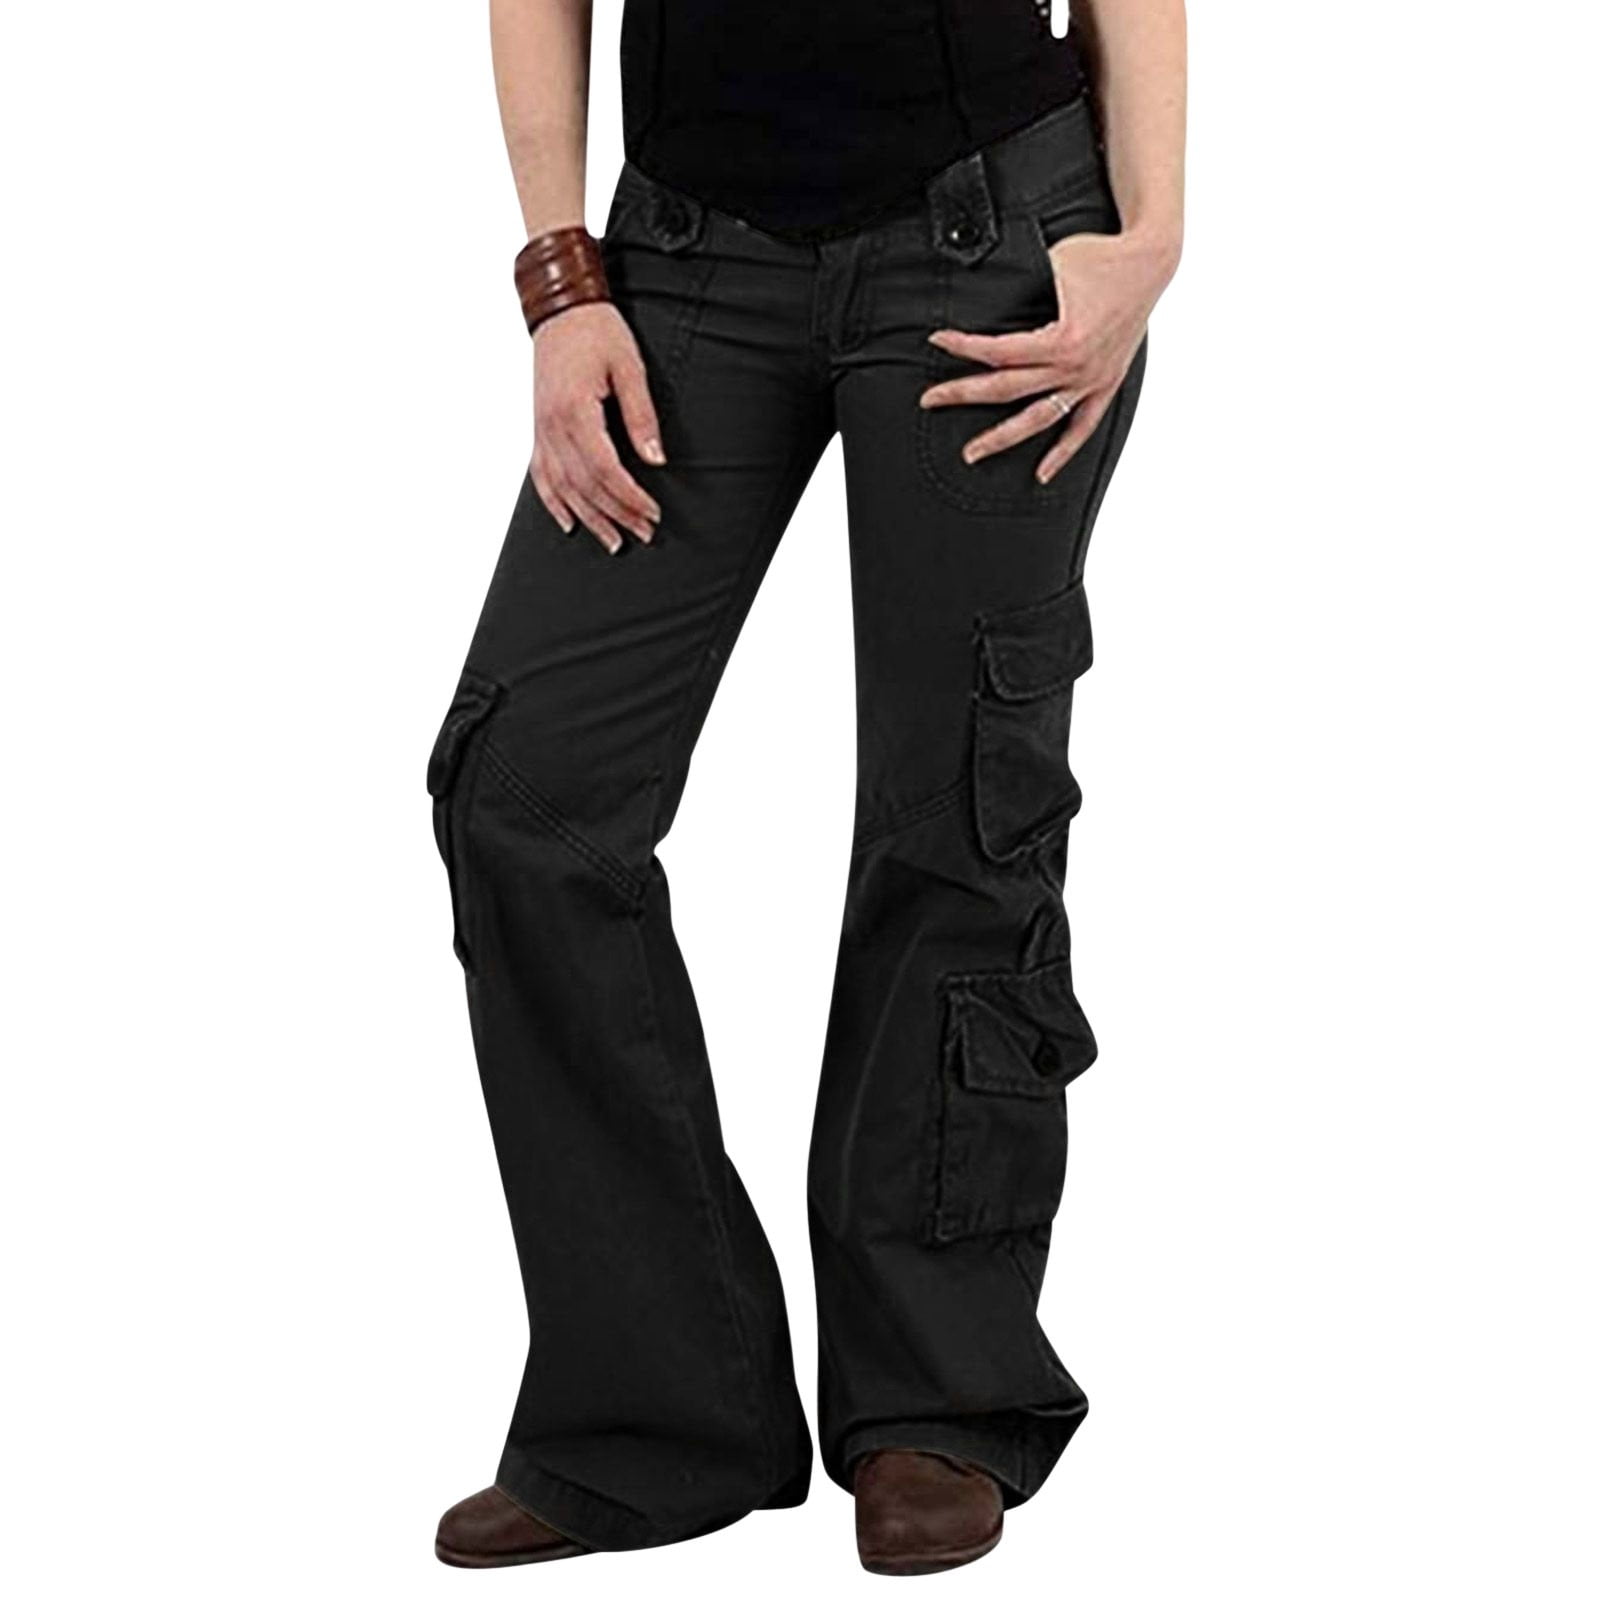 UHUYA Women's Soft Cargo Pants, Lightweight Outdoor Stretch High Waist  Hiking Pants, Straight Wide Leg Casual Cargo Leggings, Workout Athletic  Pants